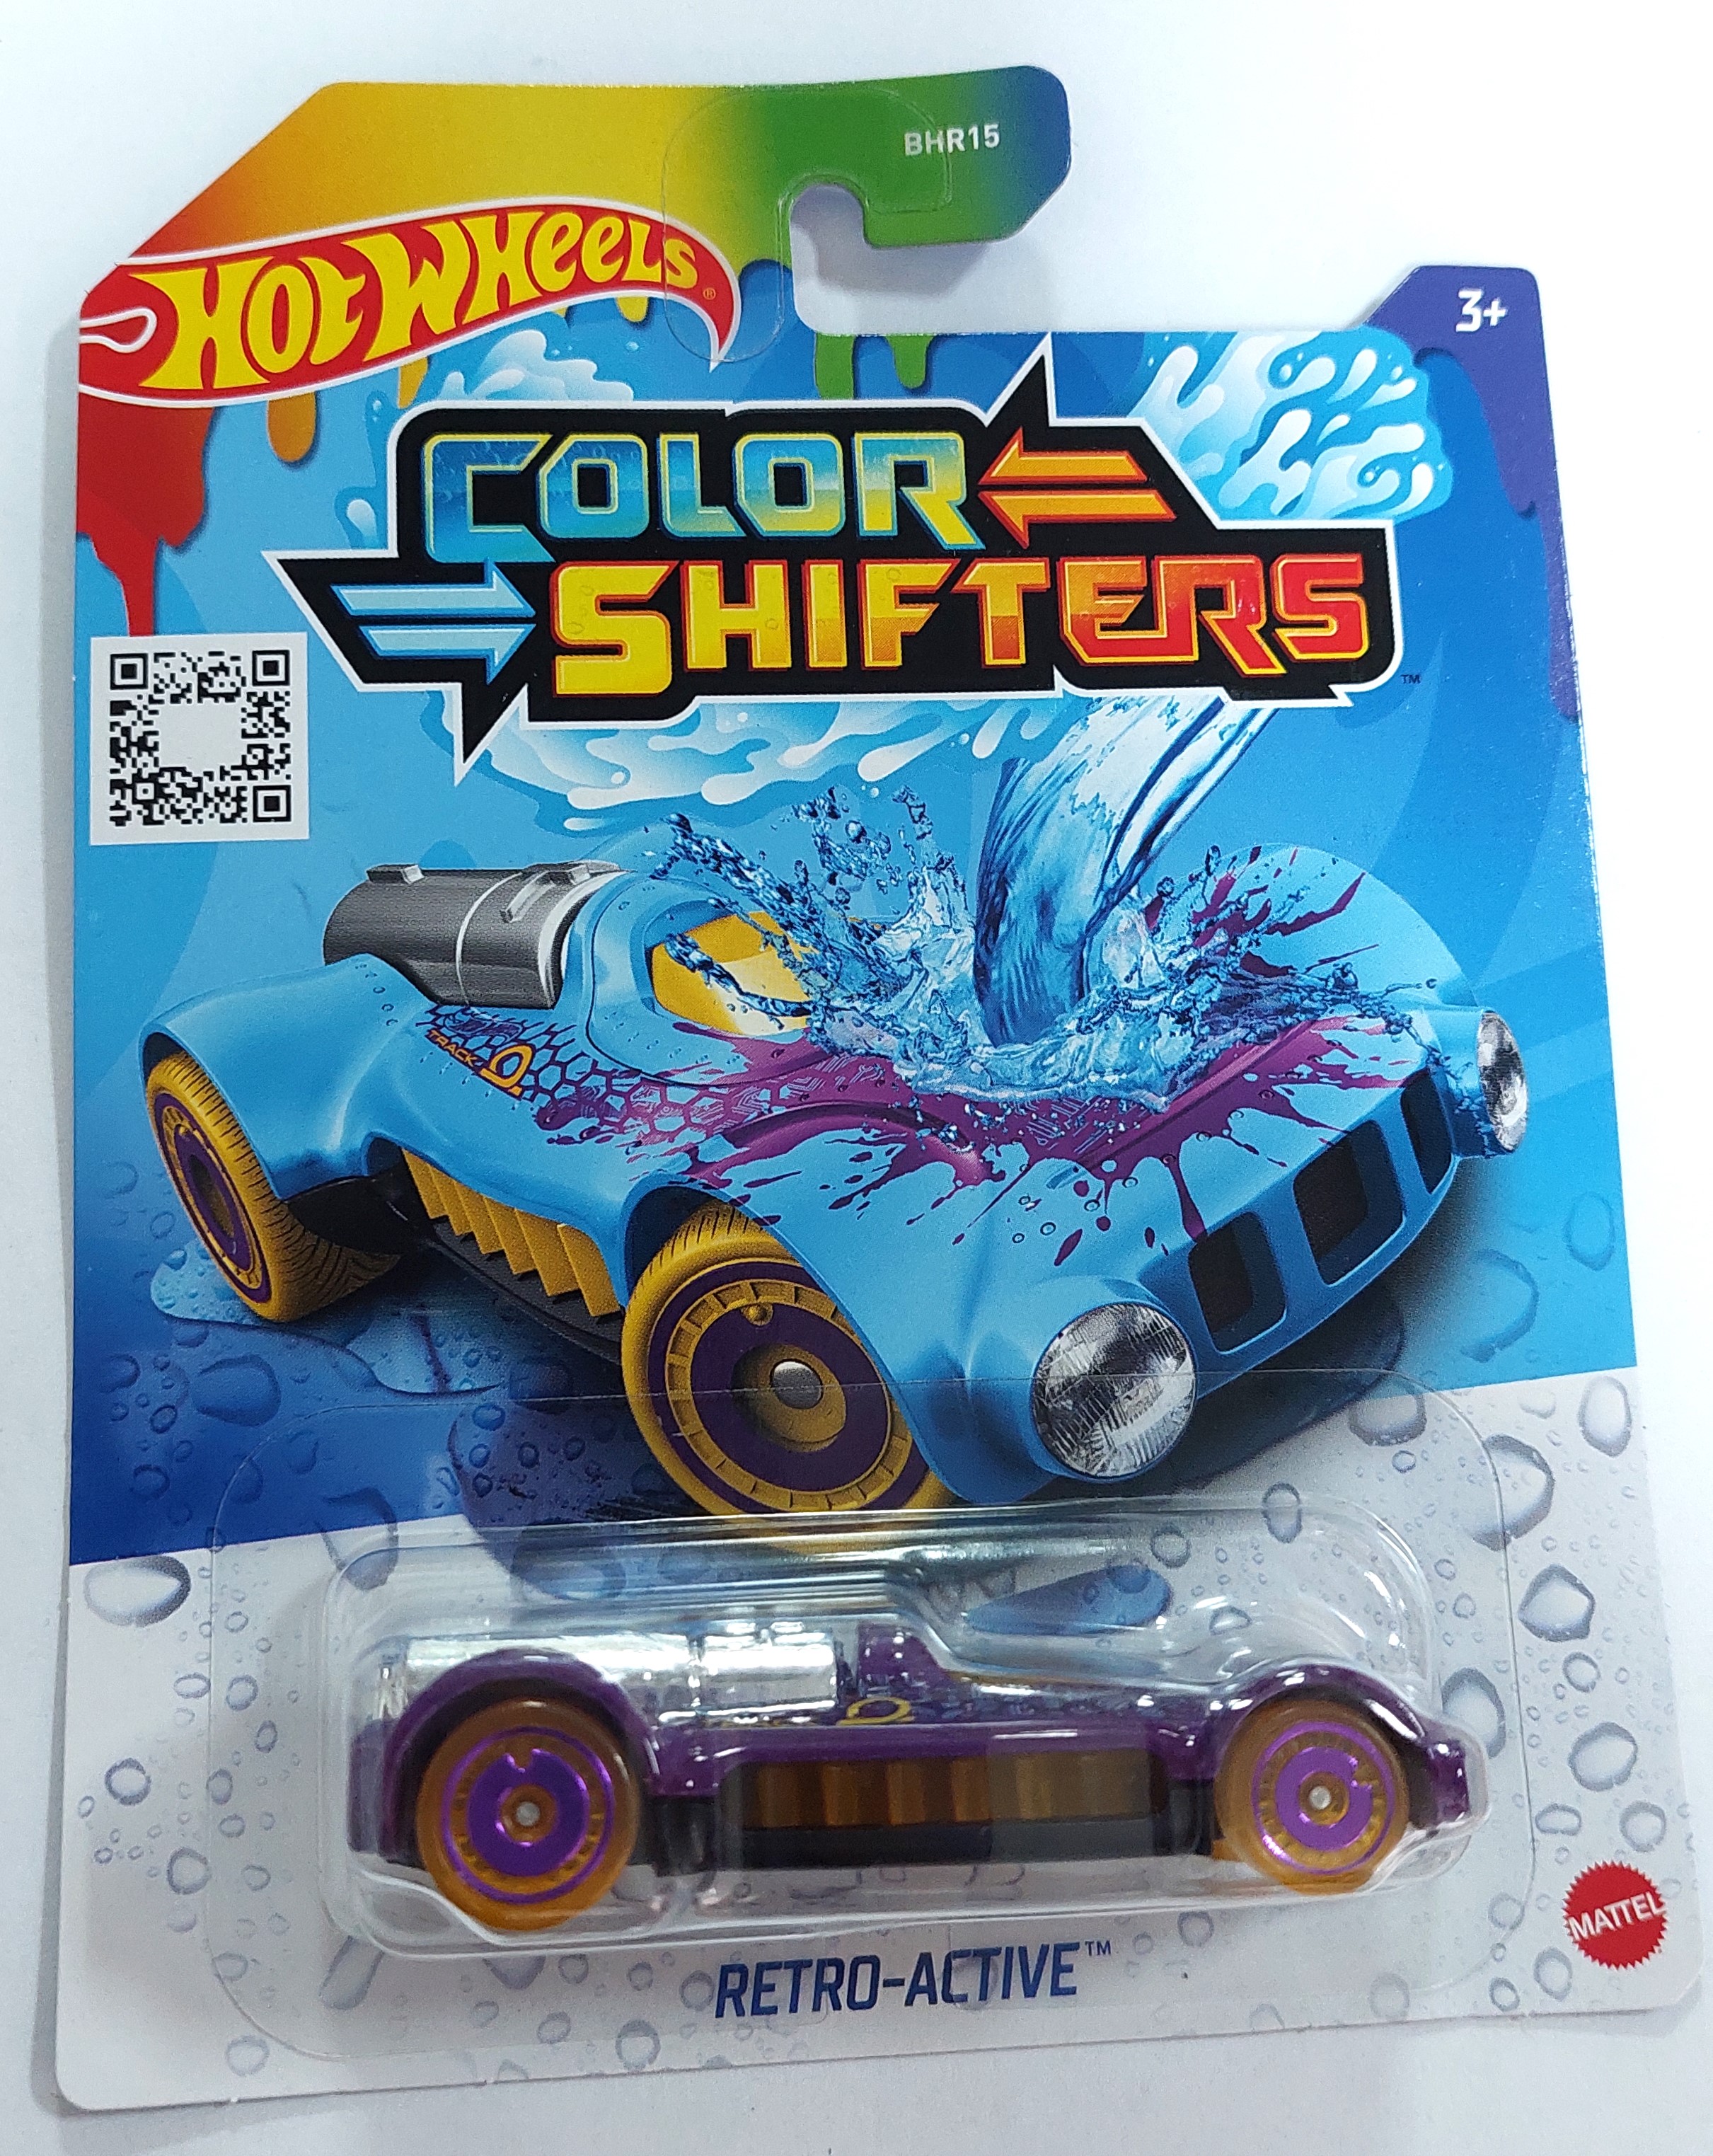 Машинка Hot Wheels Bhr15 Color Shifters Retro-active, Hxh08-la15 машинка hot wheels color shifters fish d